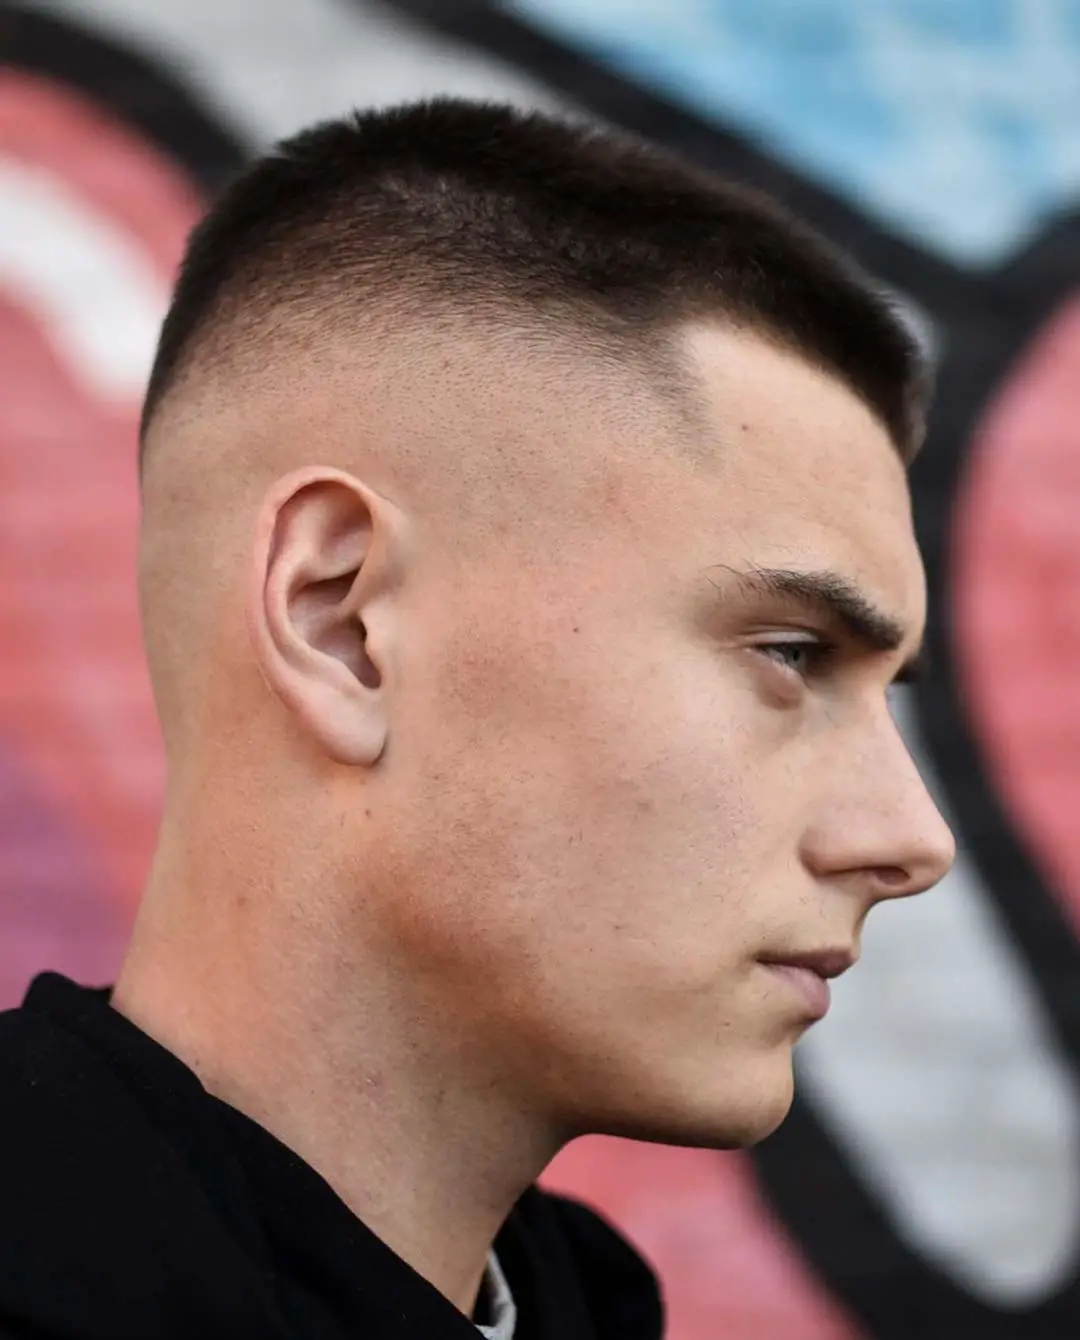 Military Haircut 20 Best Army Haircuts For Men In 2021